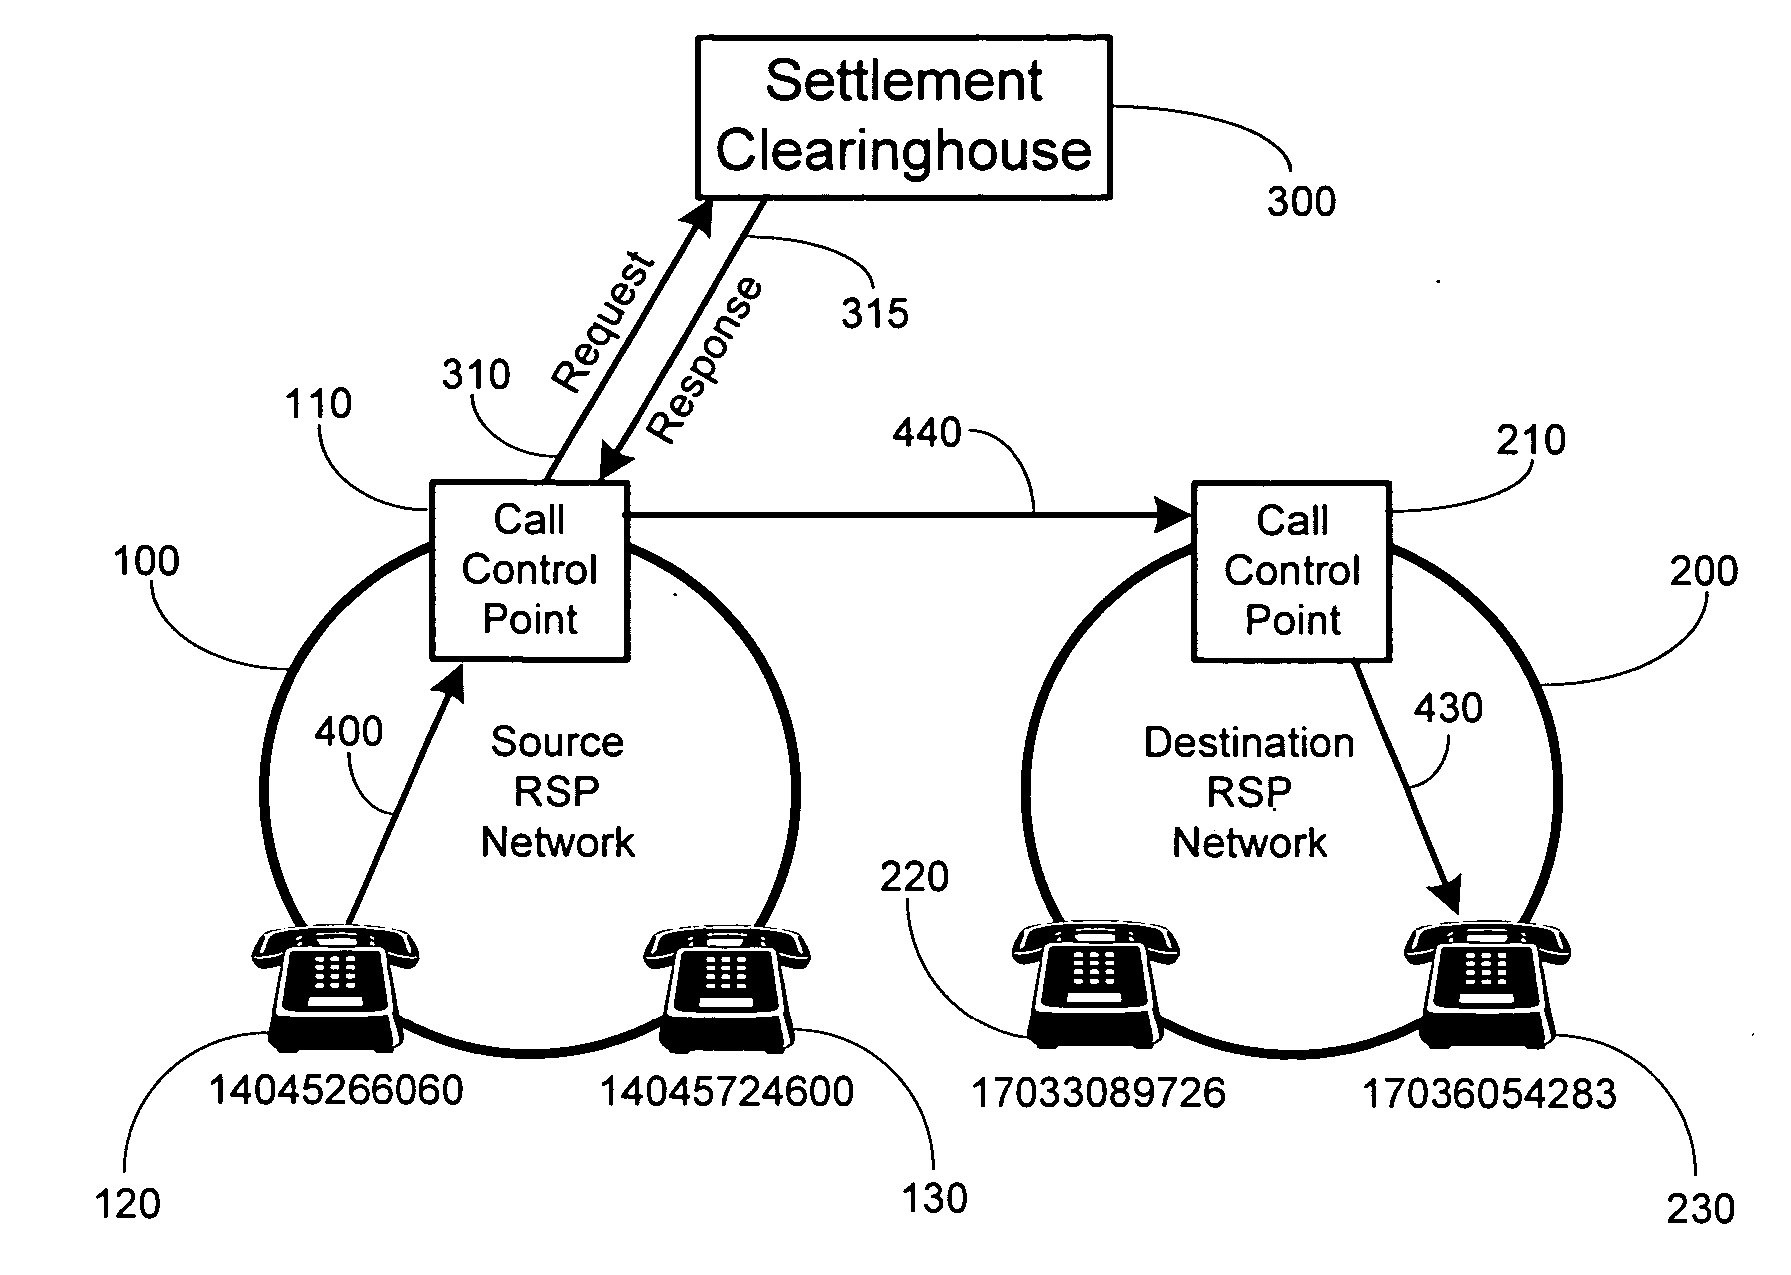 Method and system for securely authorized VoIP Interconnections between anonymous peers of VoIP networks